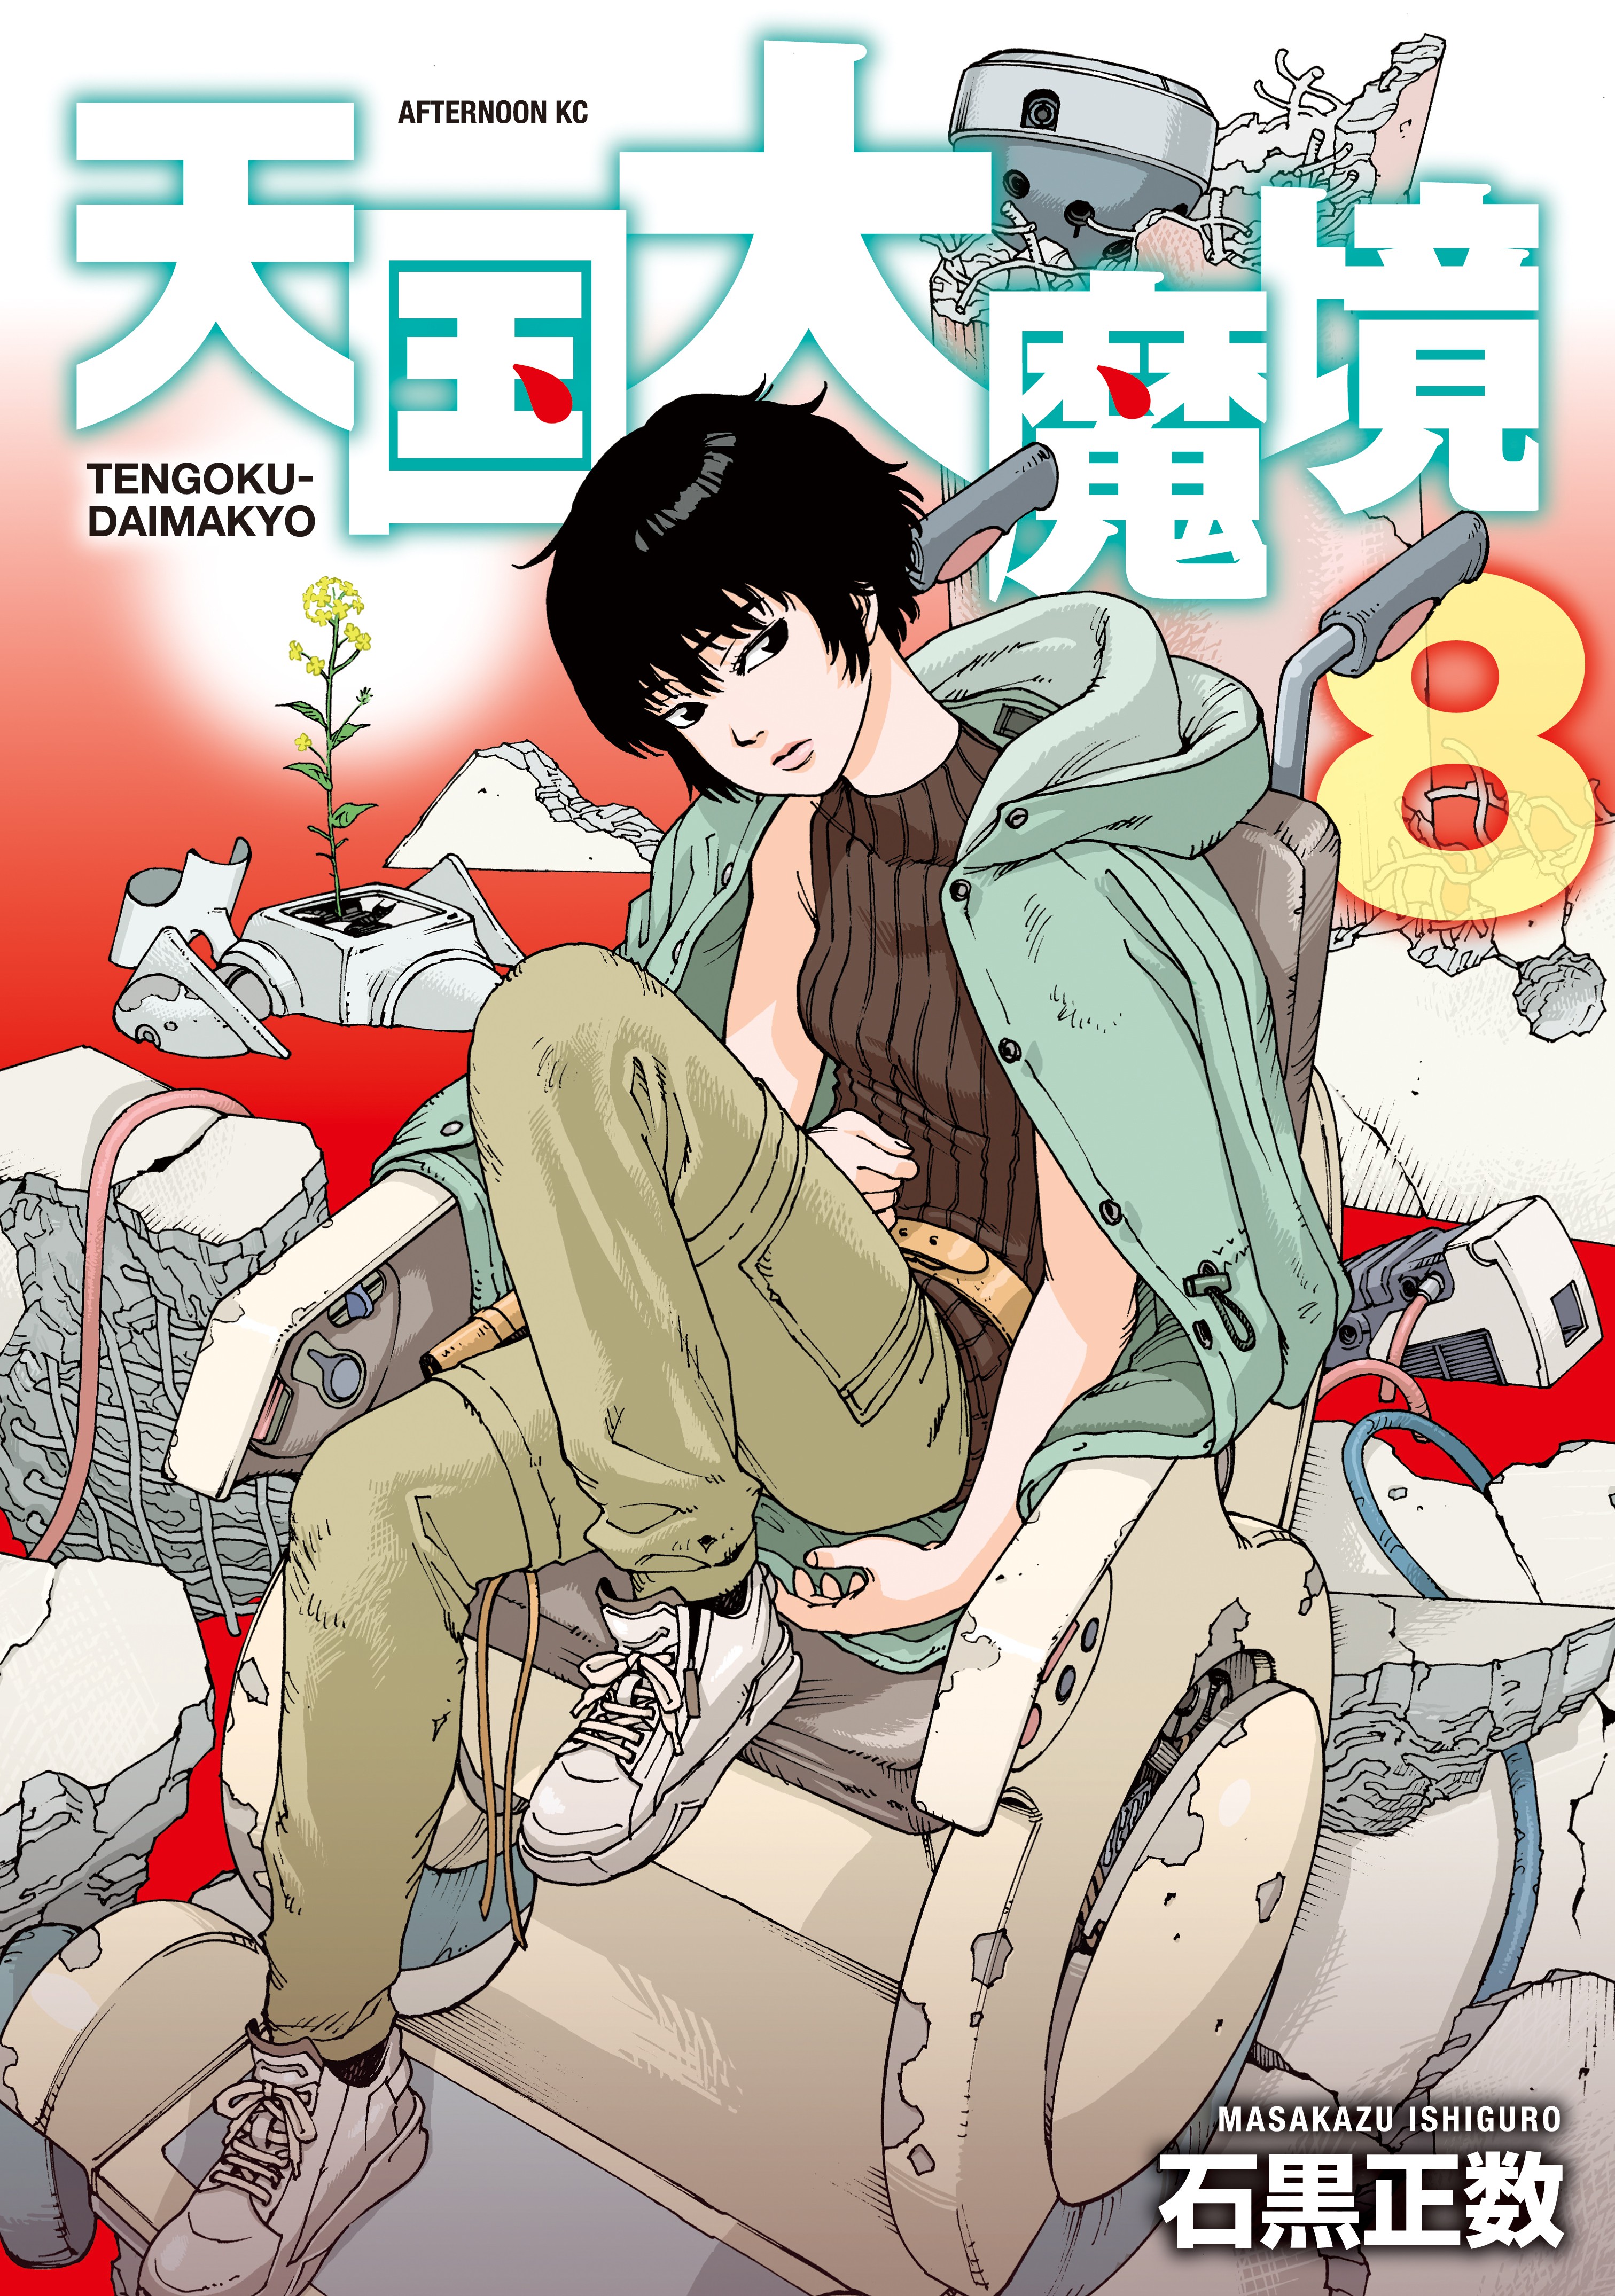 ART] Tengoku Daimakyou is on the cover of this month's Monthly Afternoon! :  r/manga